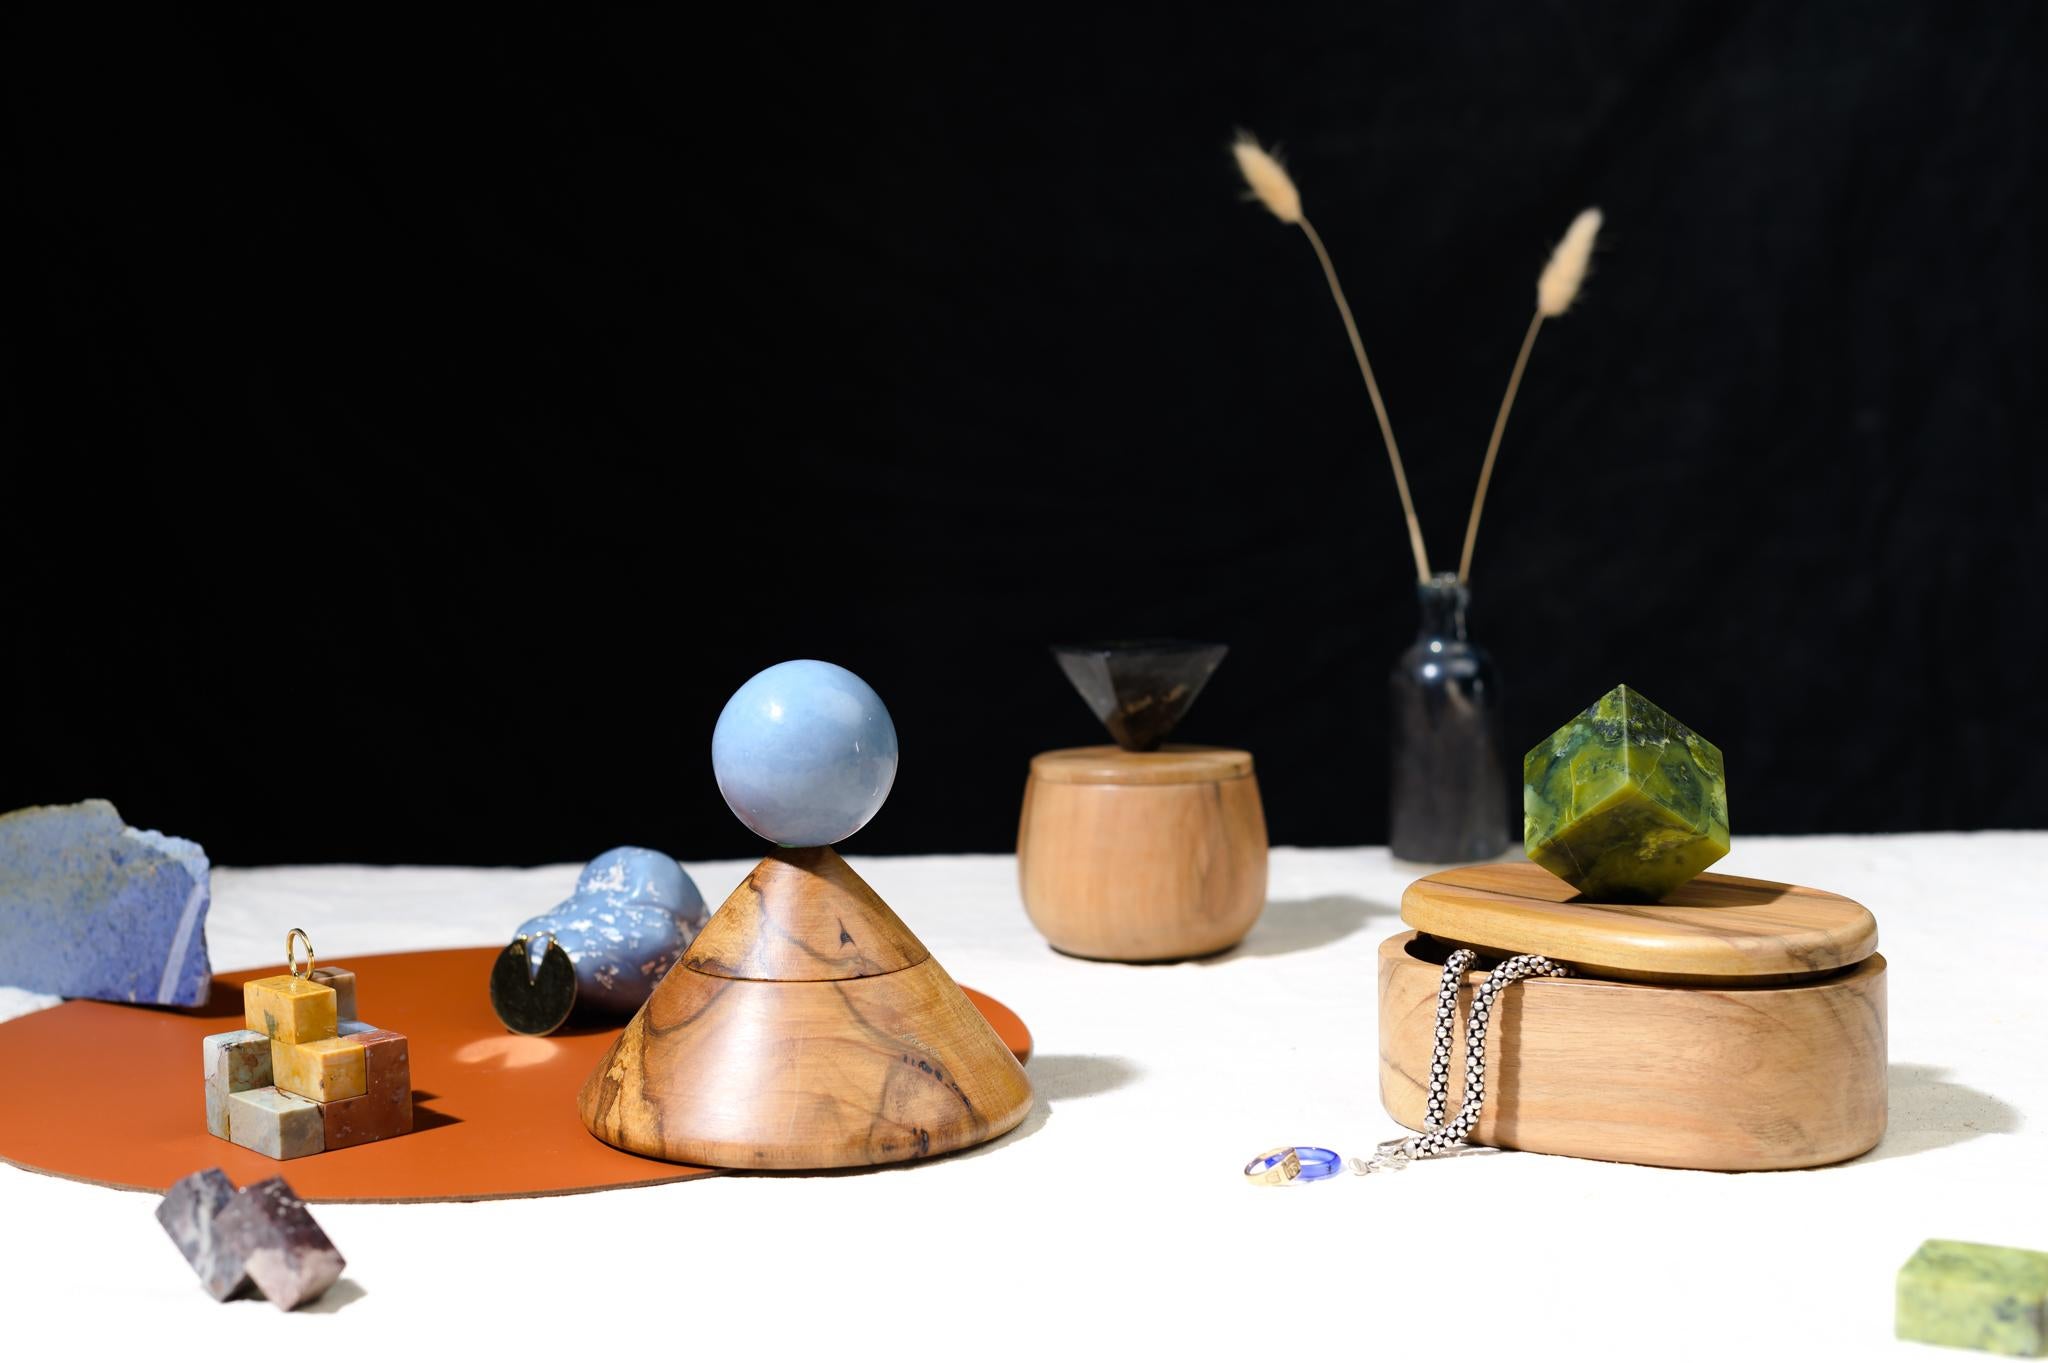 The oval everything box jewelry box is a hand-carved using traditional wood carpentry techniques. The cube-shaped green gem stone handle is a geometric element that offers a playful pause in the day to enjoy the luxurious semi-precious stone